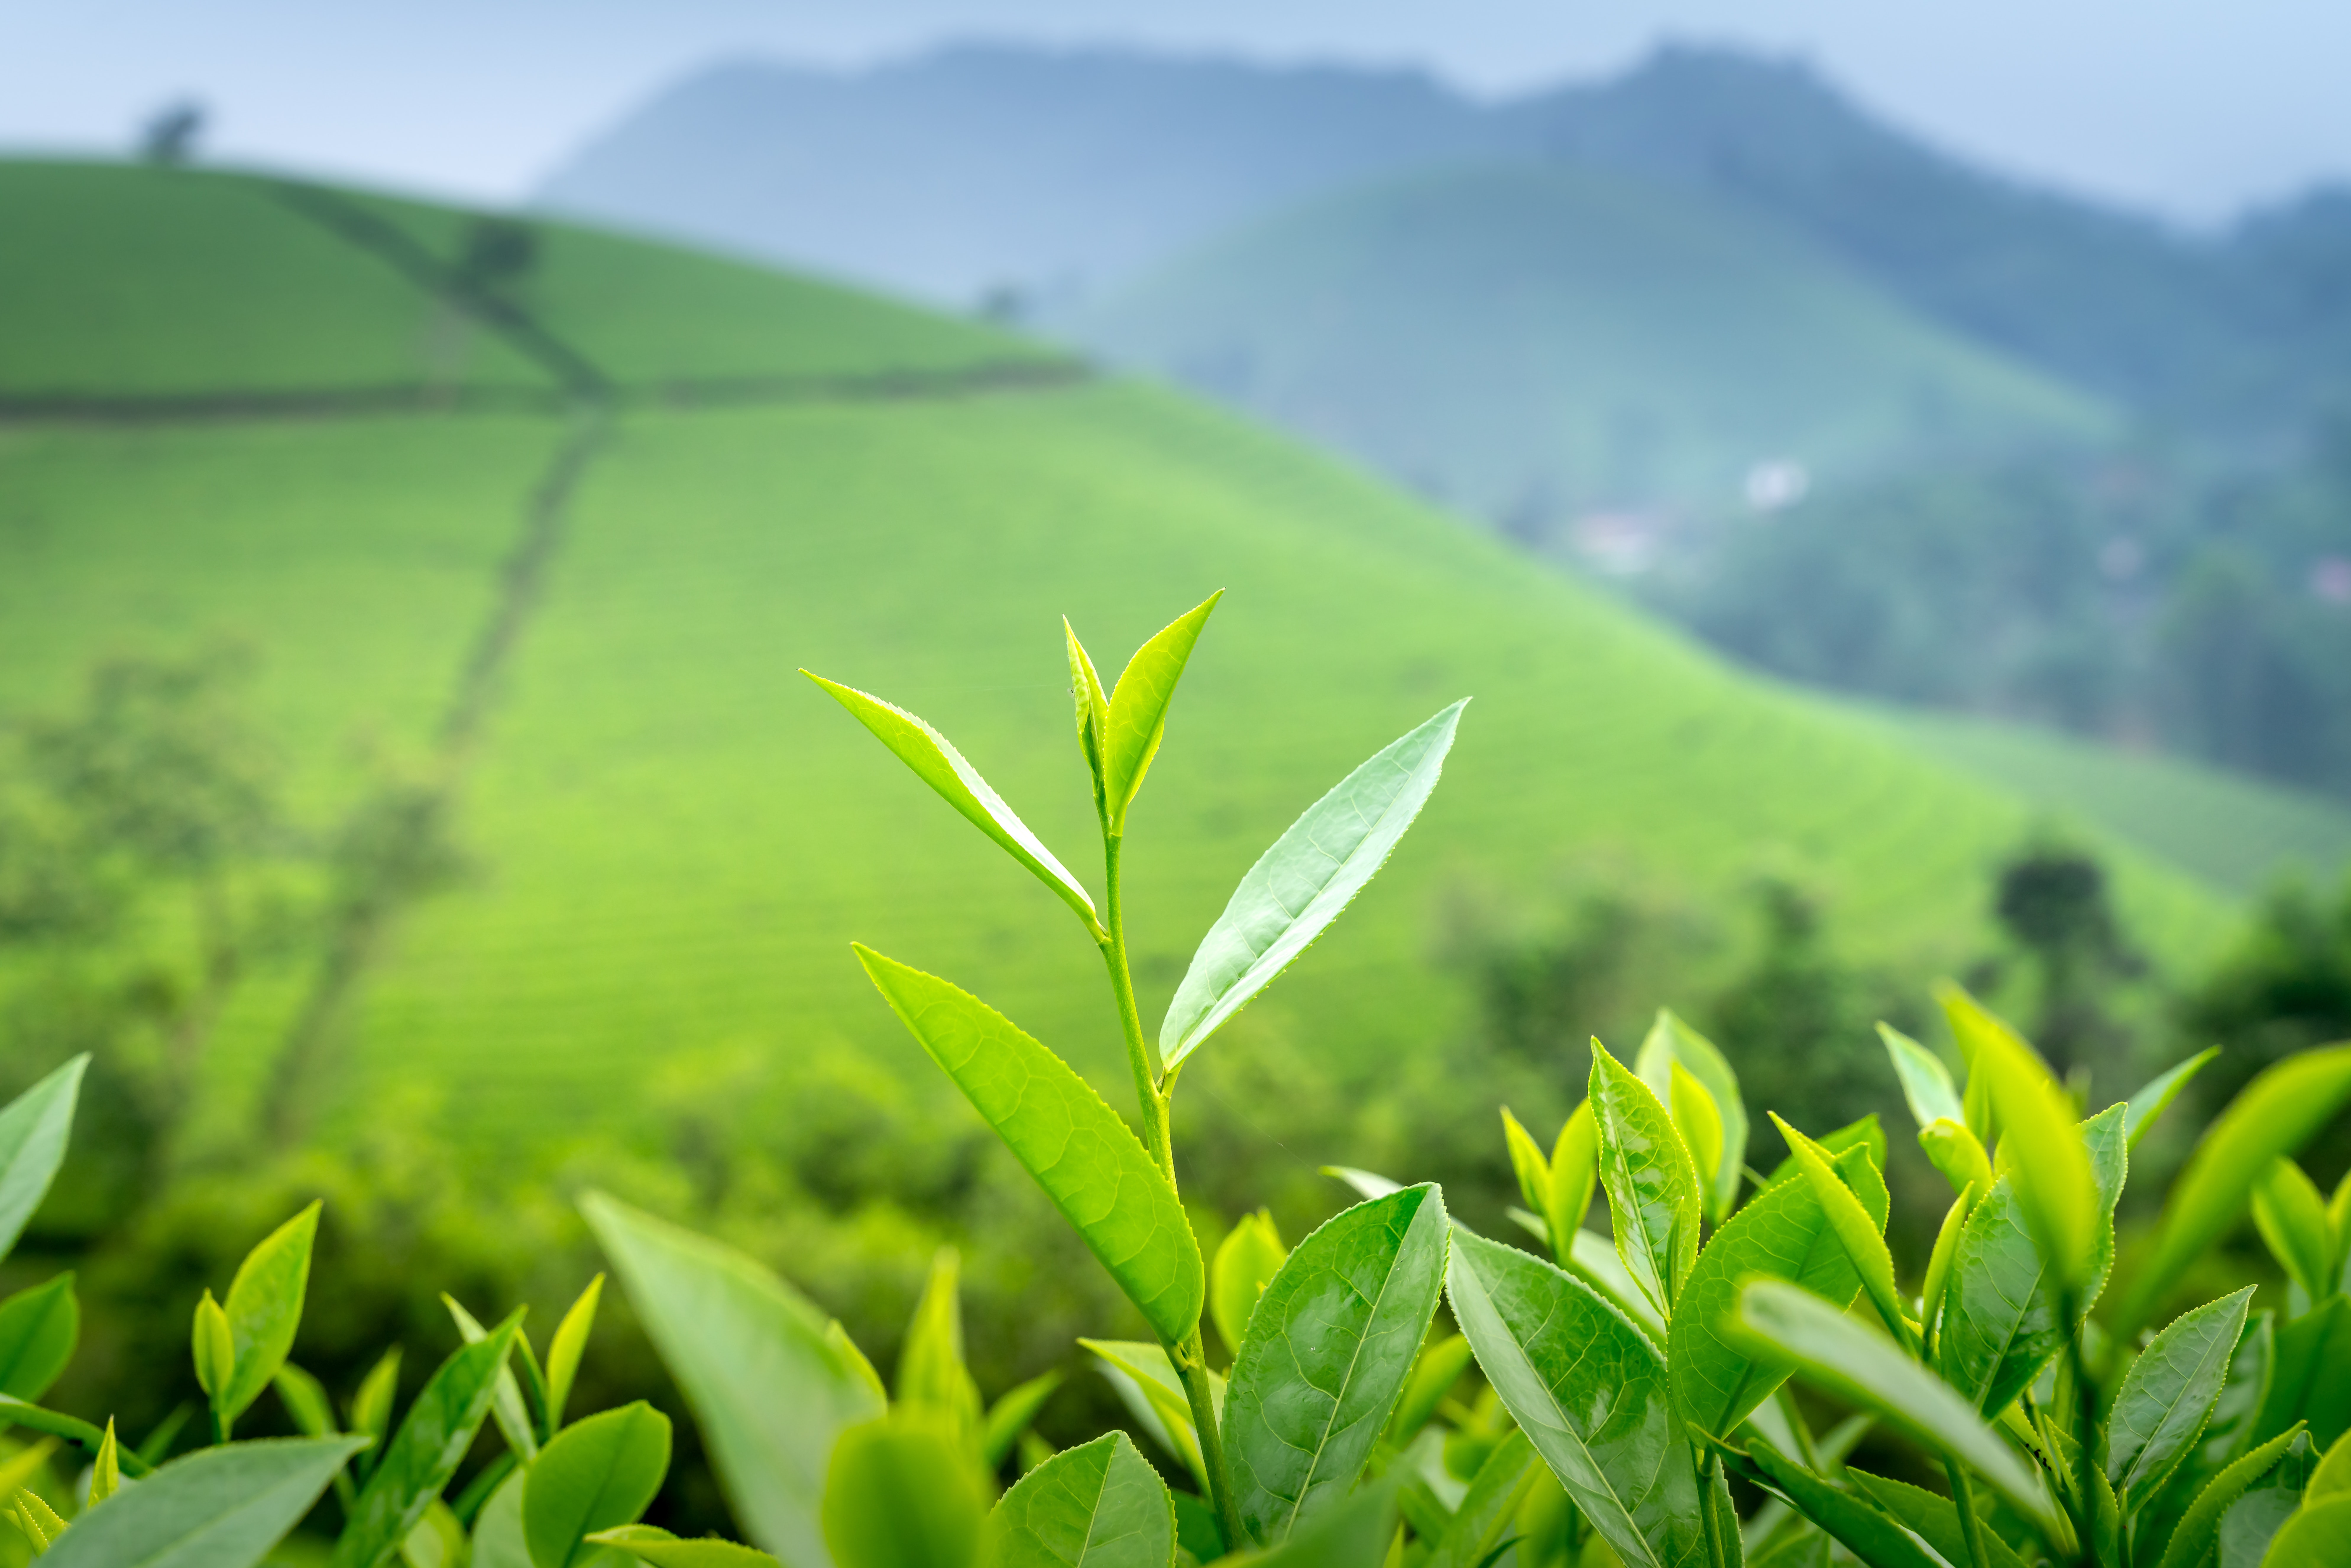 L-Theanine: The Green Tea Extract You’ve Been Hearing Buzz About